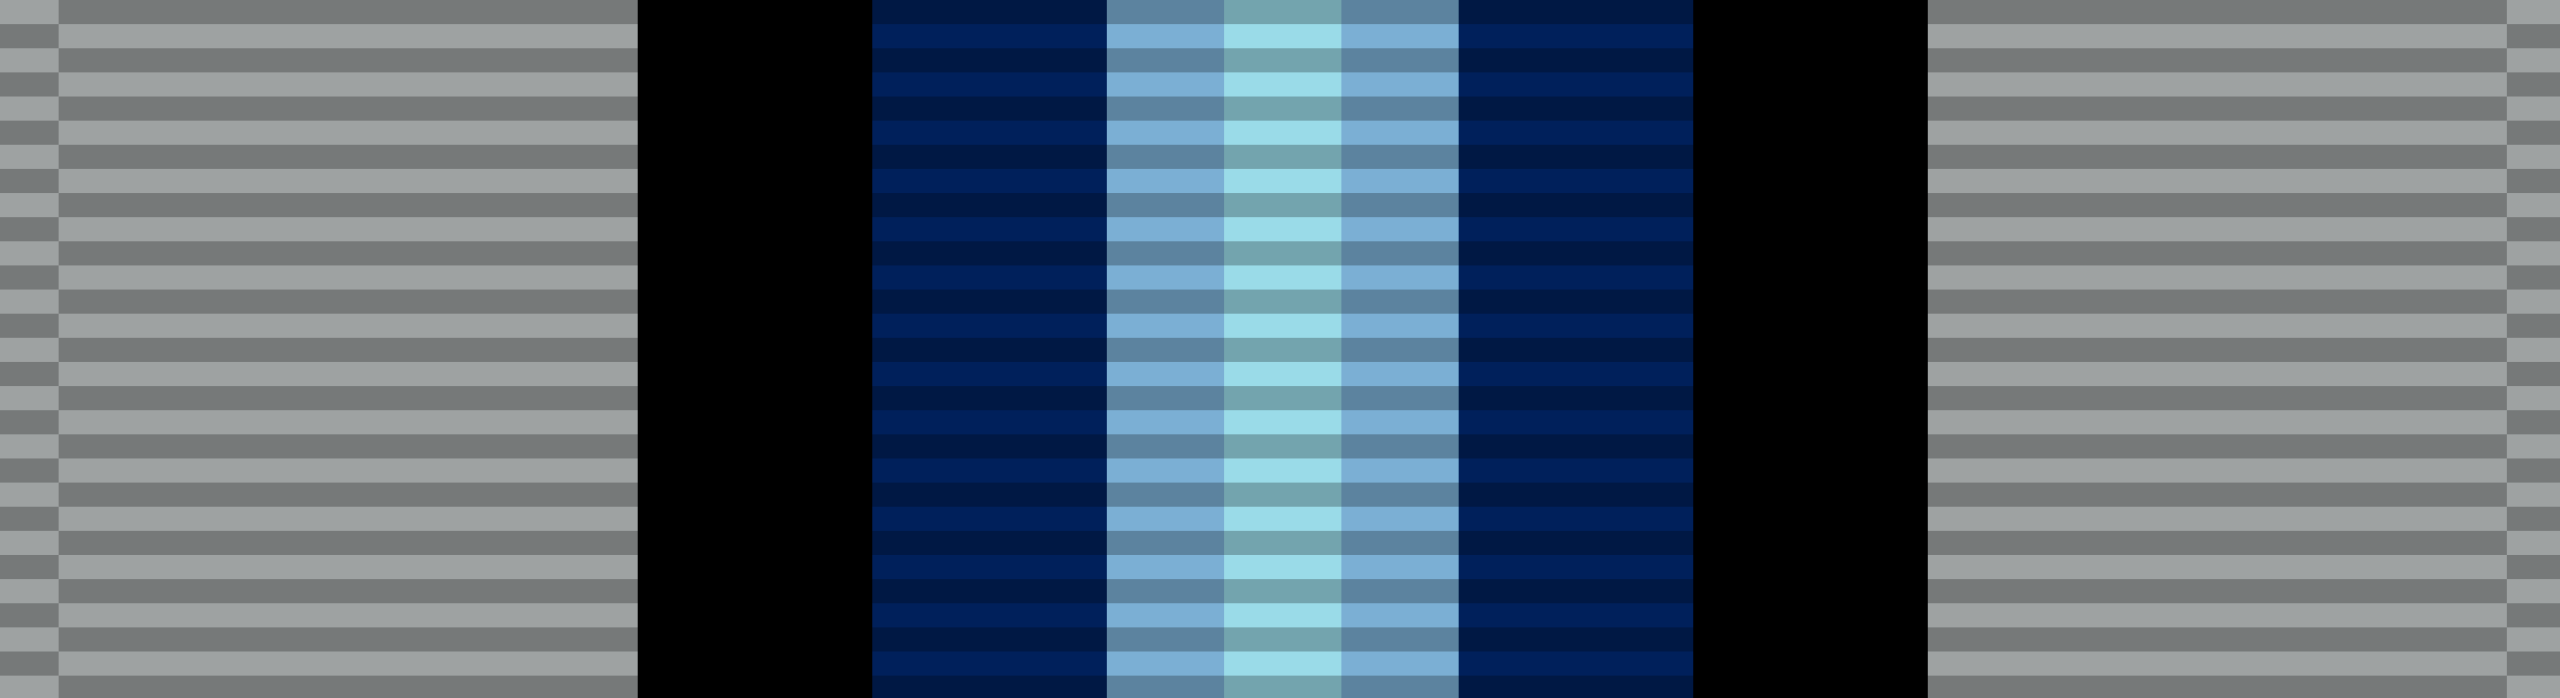 Space Force Good Conduct Medal